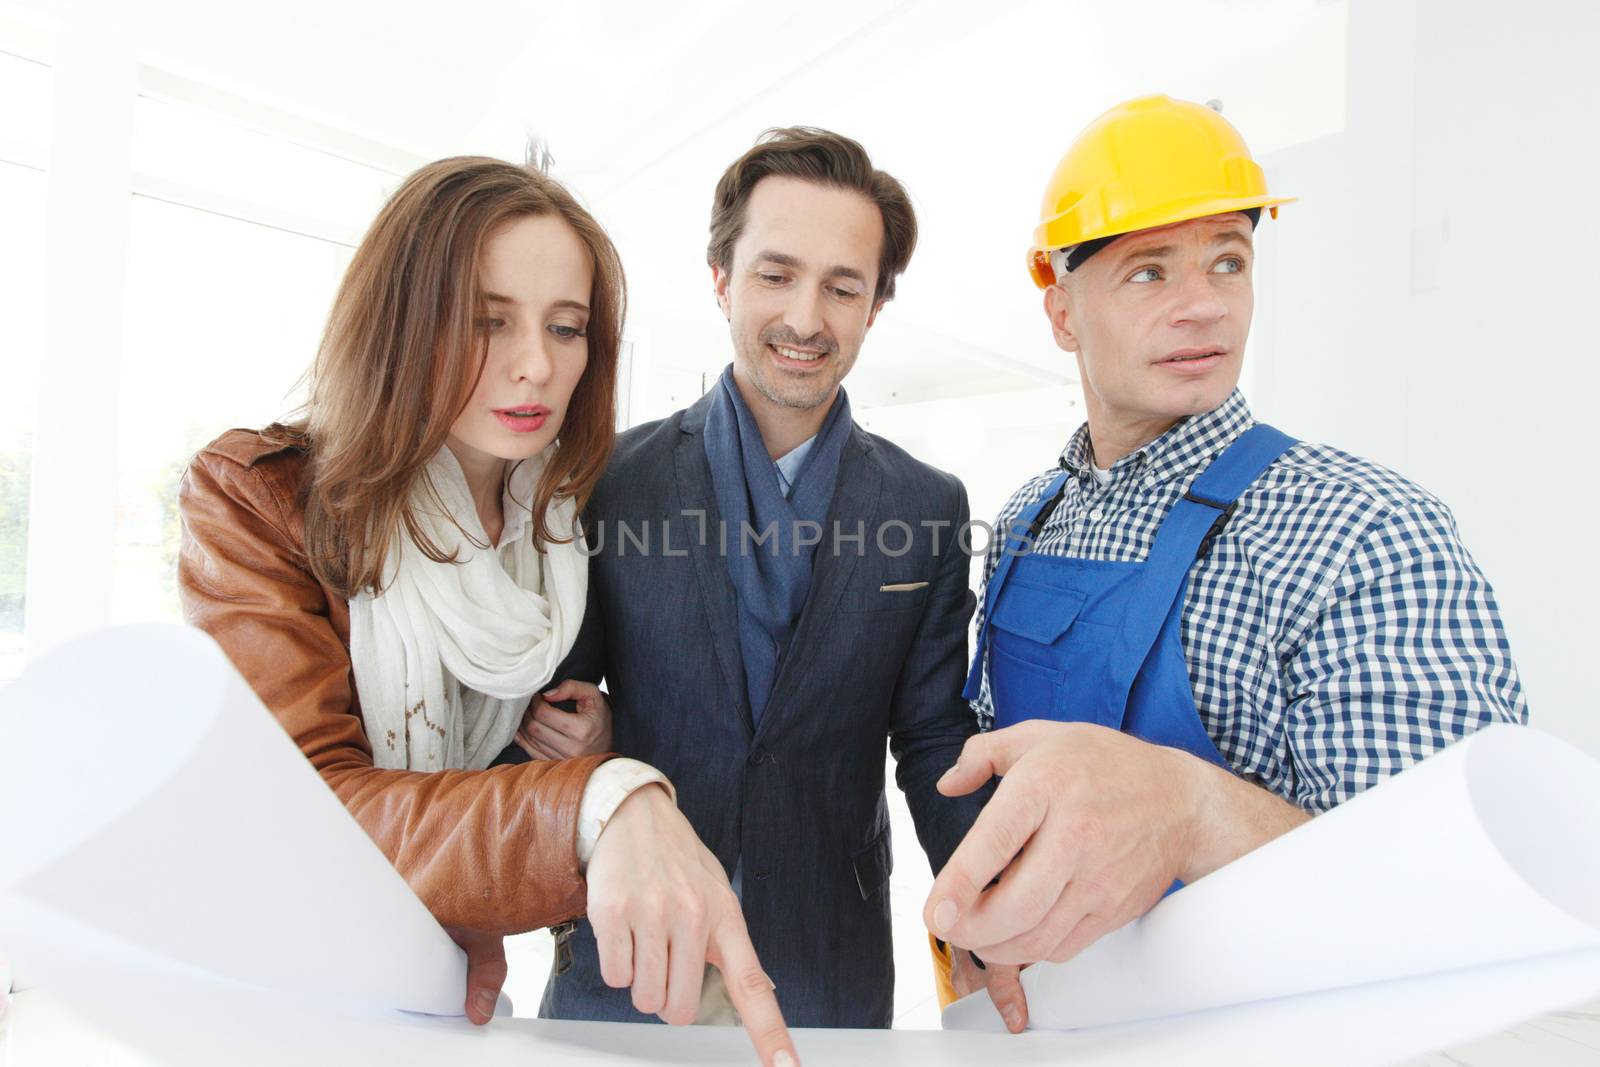 Worker shows house design plans  by ALotOfPeople